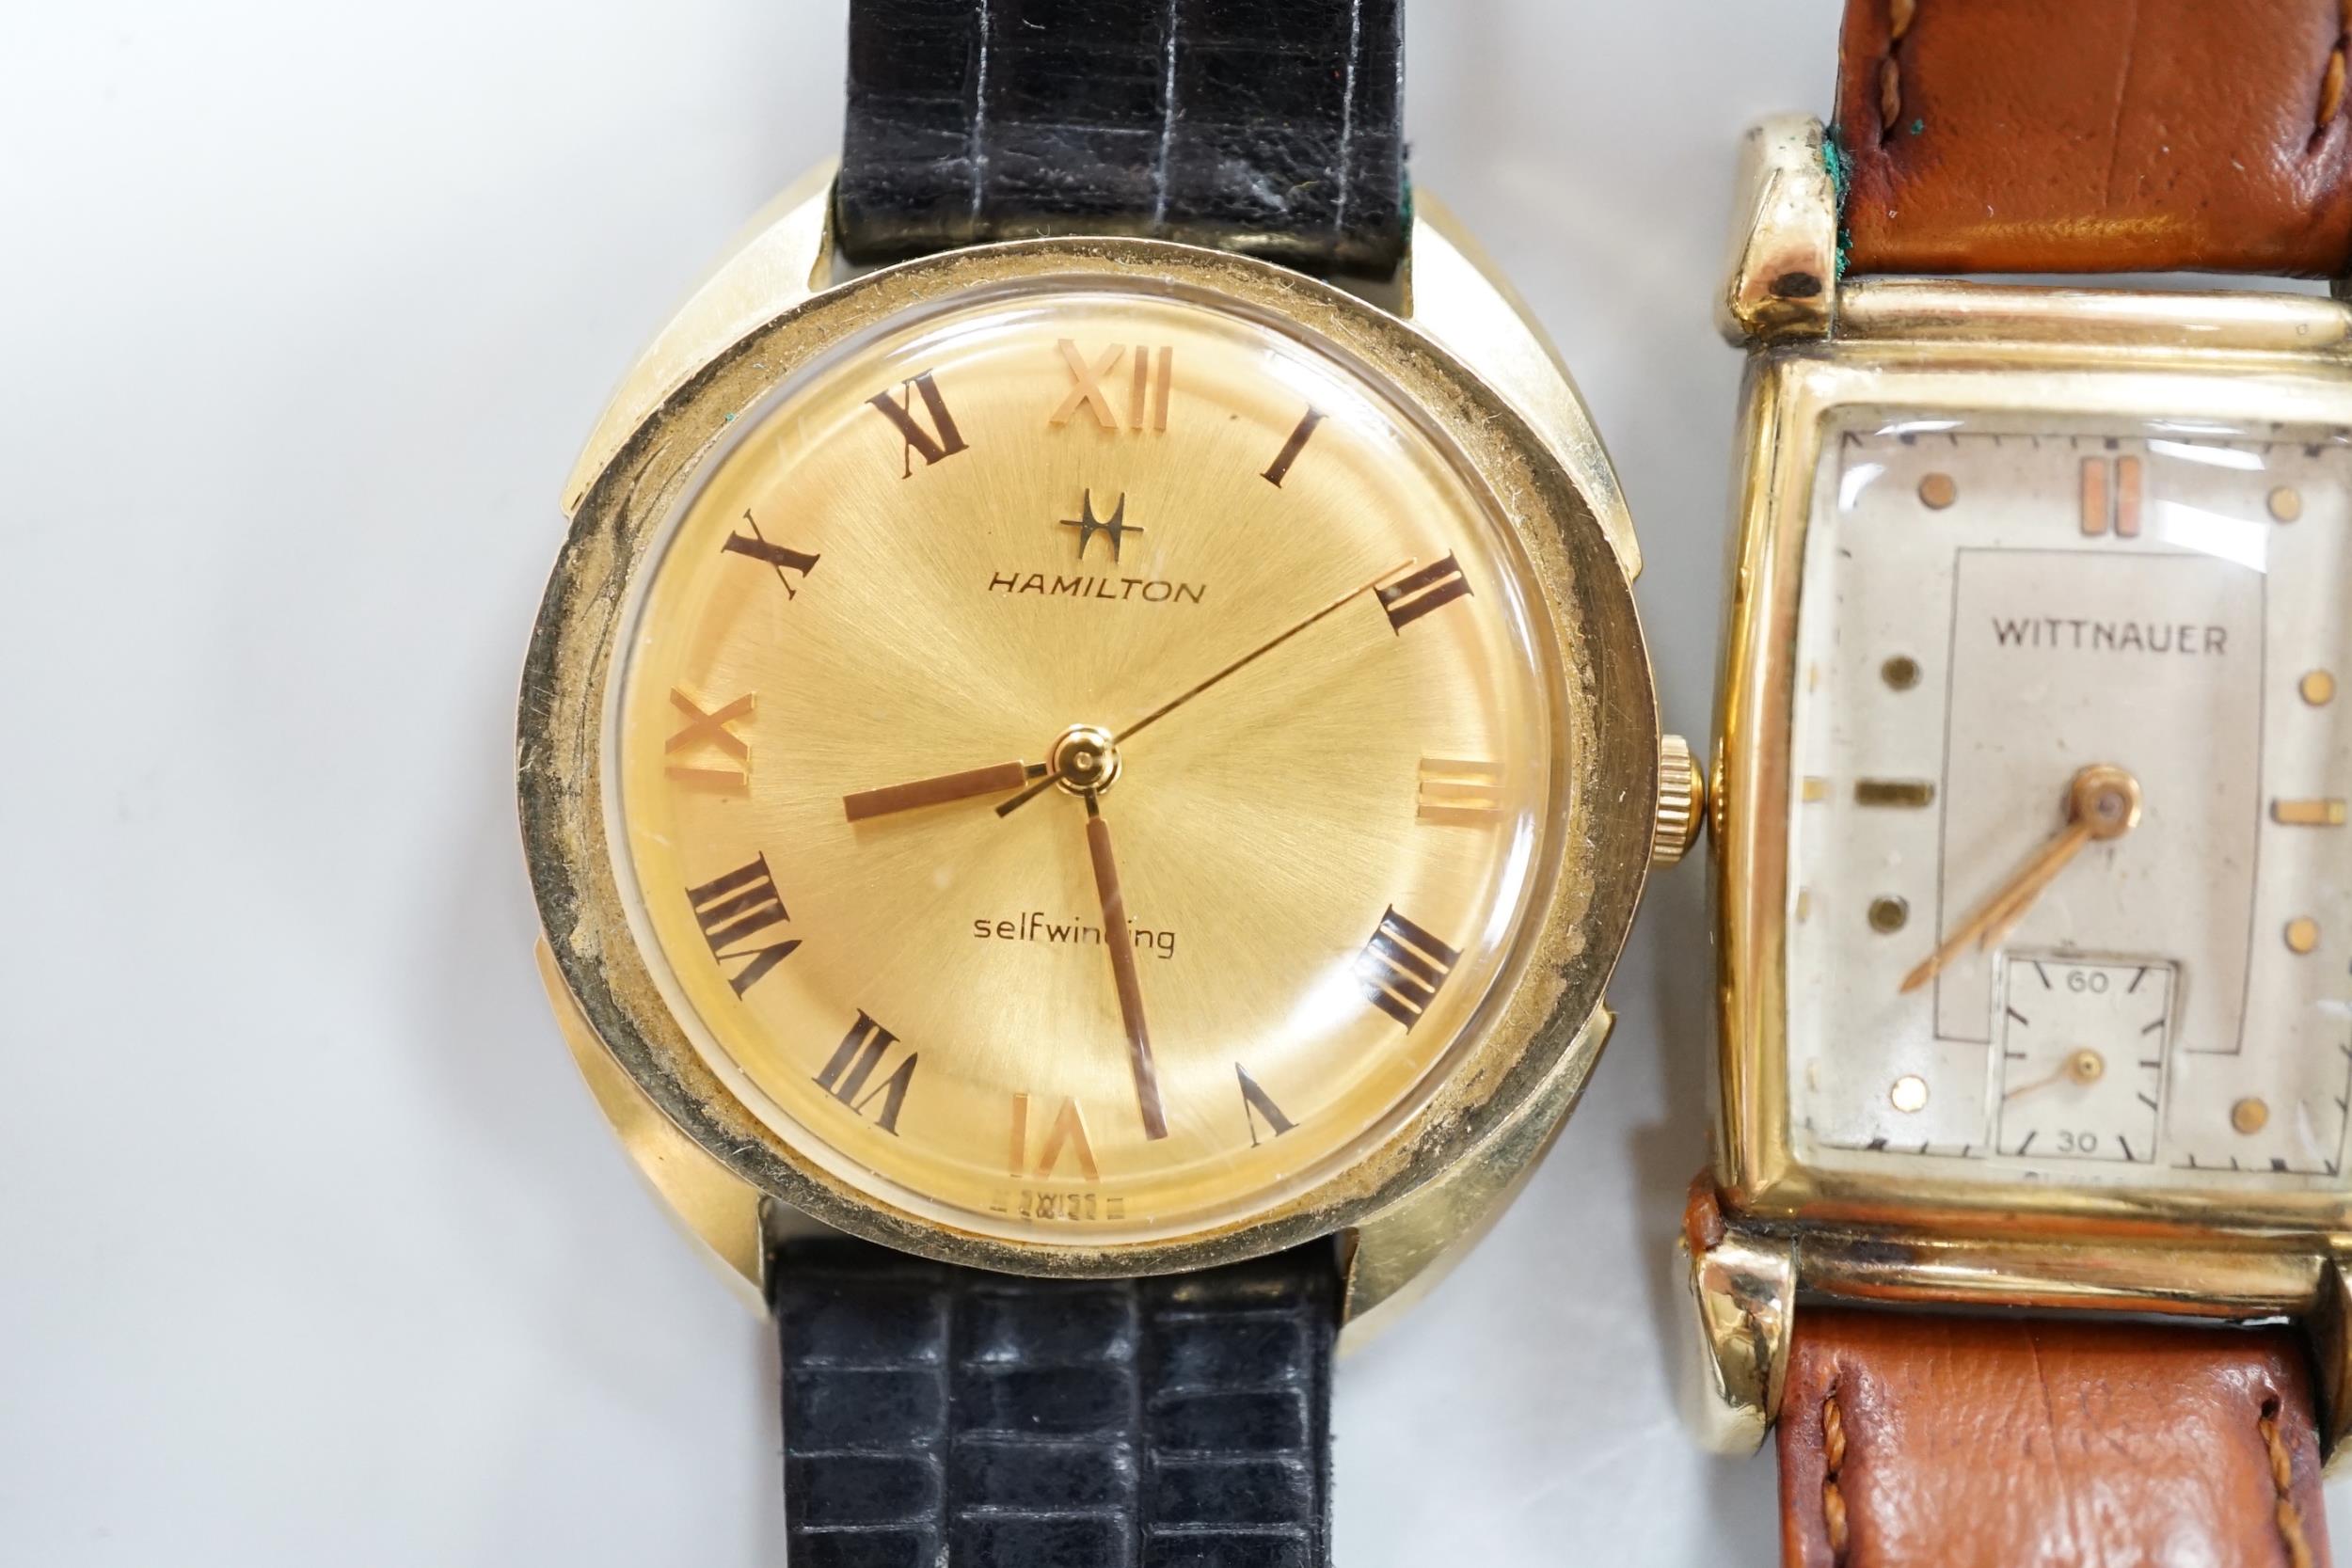 A gentleman's 14K gold Hamilton self winding wrist watch and a gold plated Witnauer wrist watch - Image 4 of 5